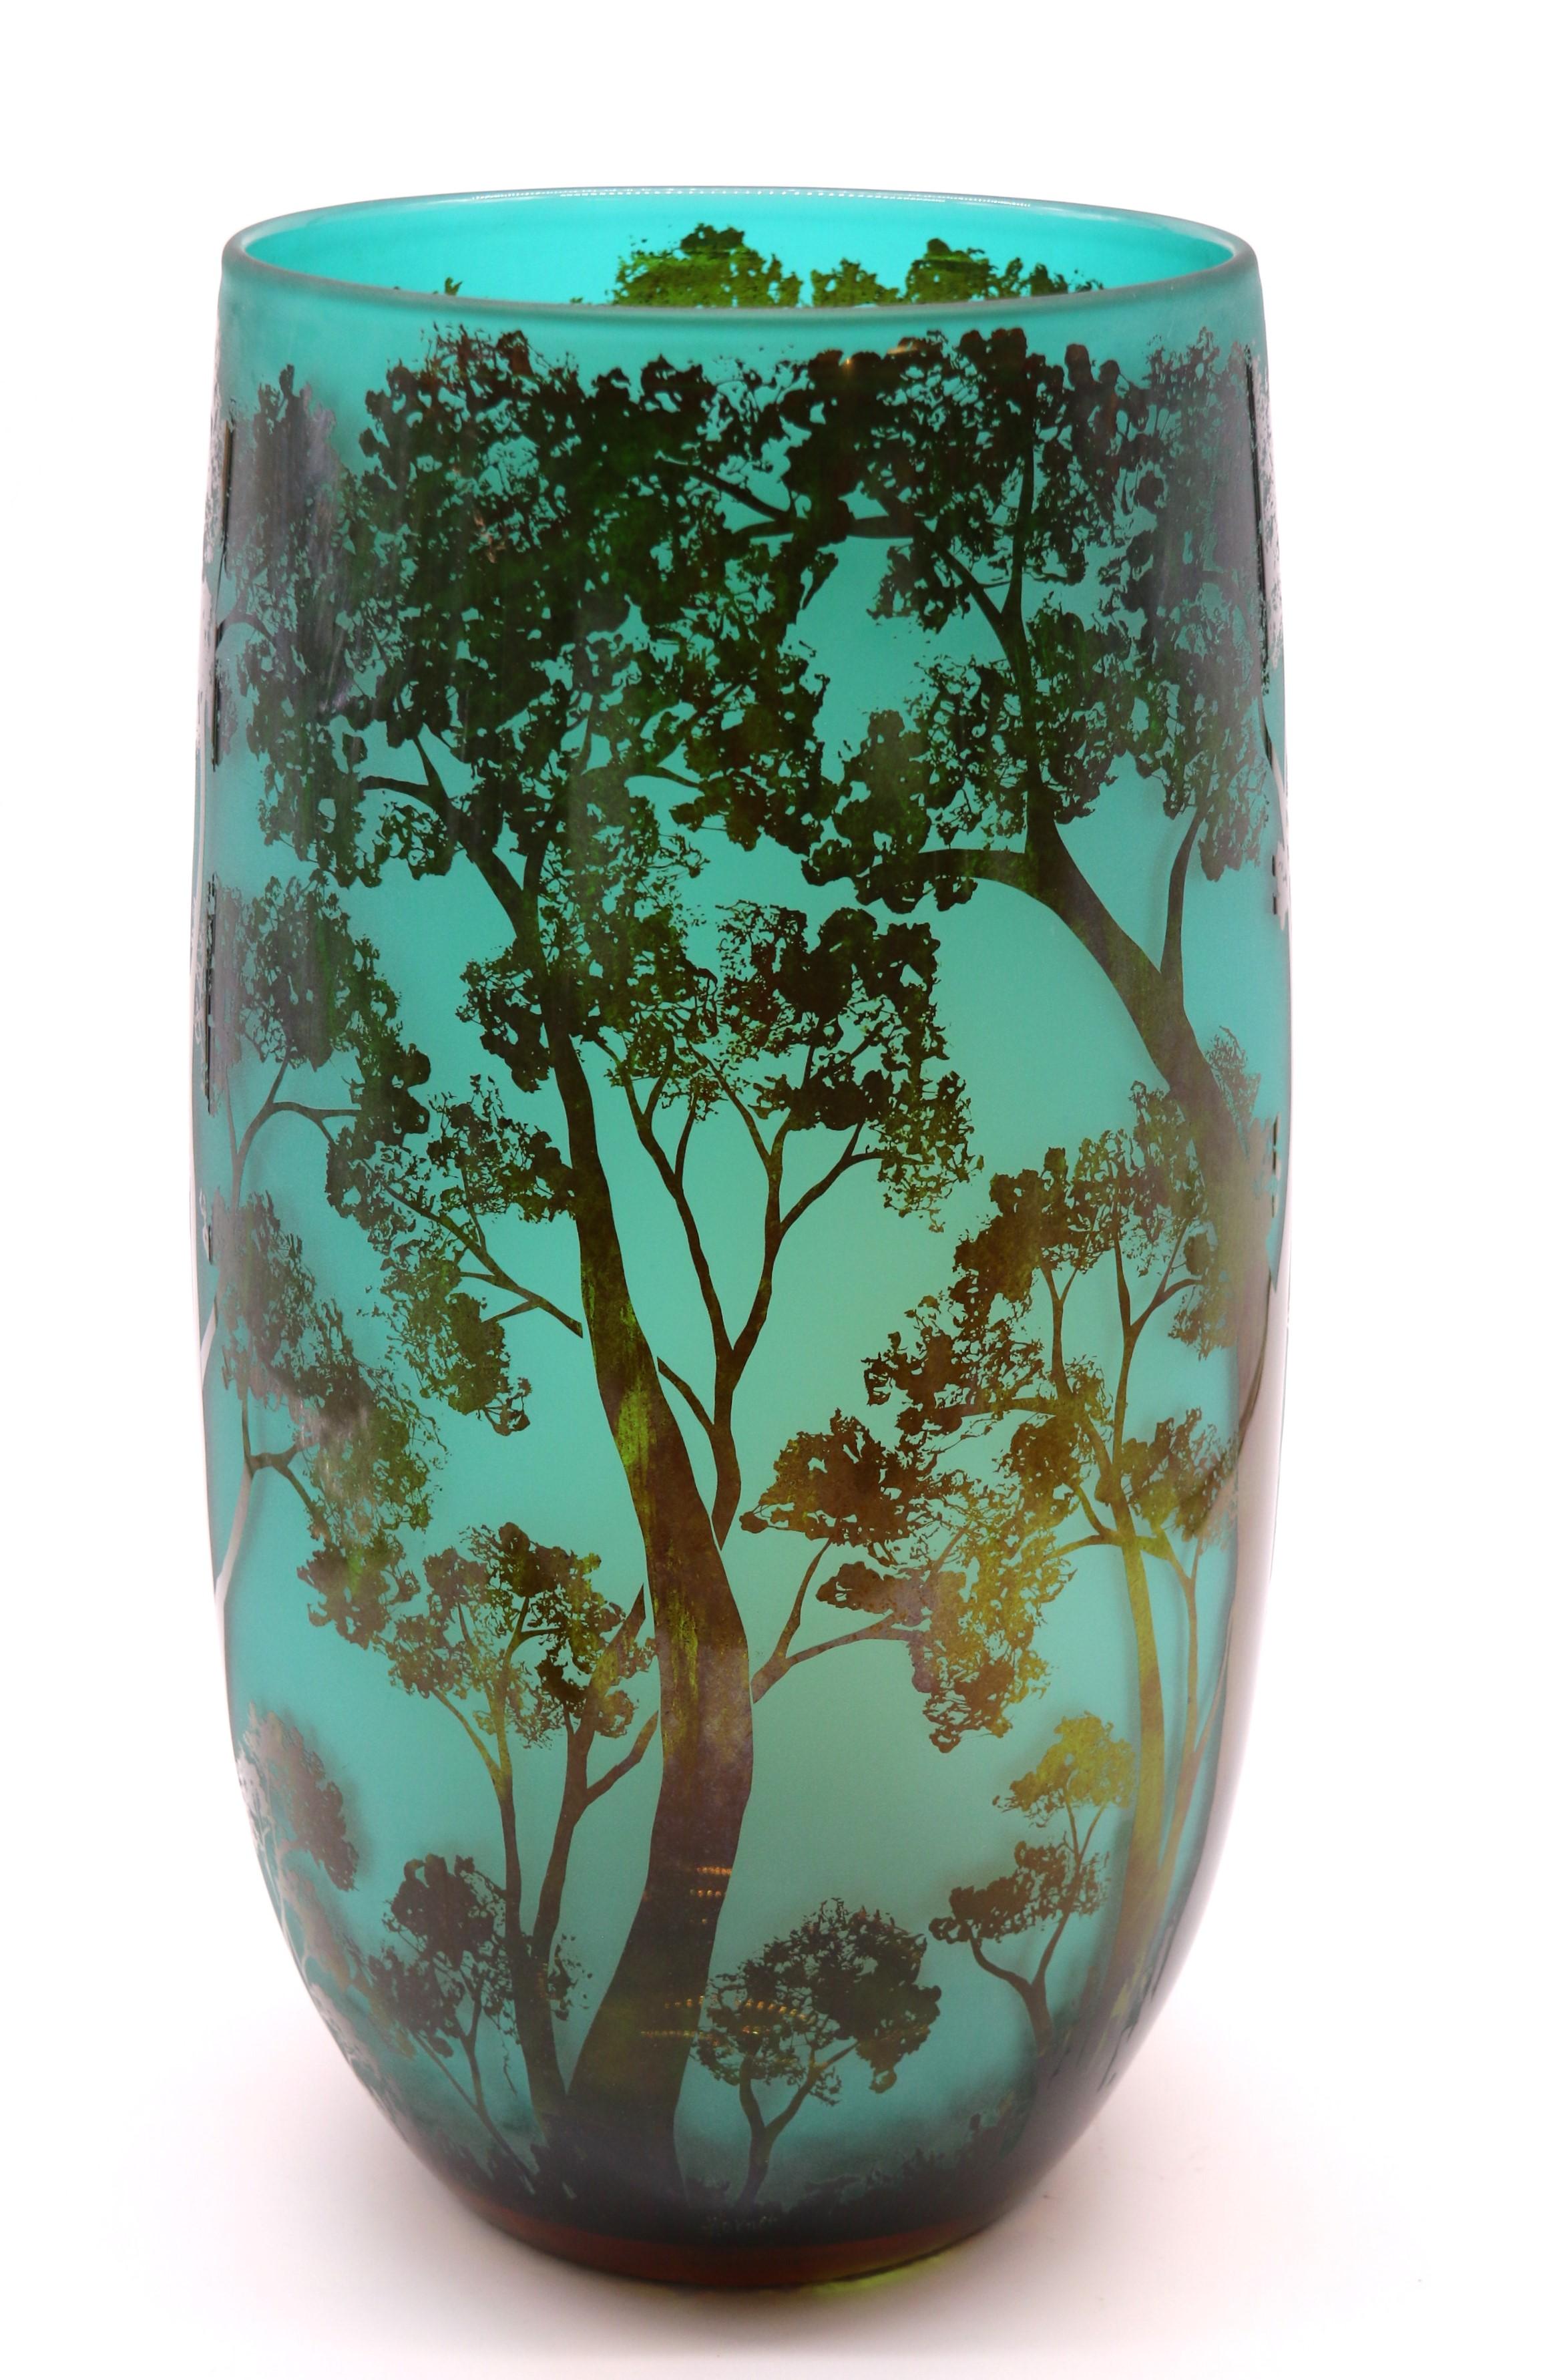 European A large 20th century cameo glass vase decorated with an intricate woodland scene